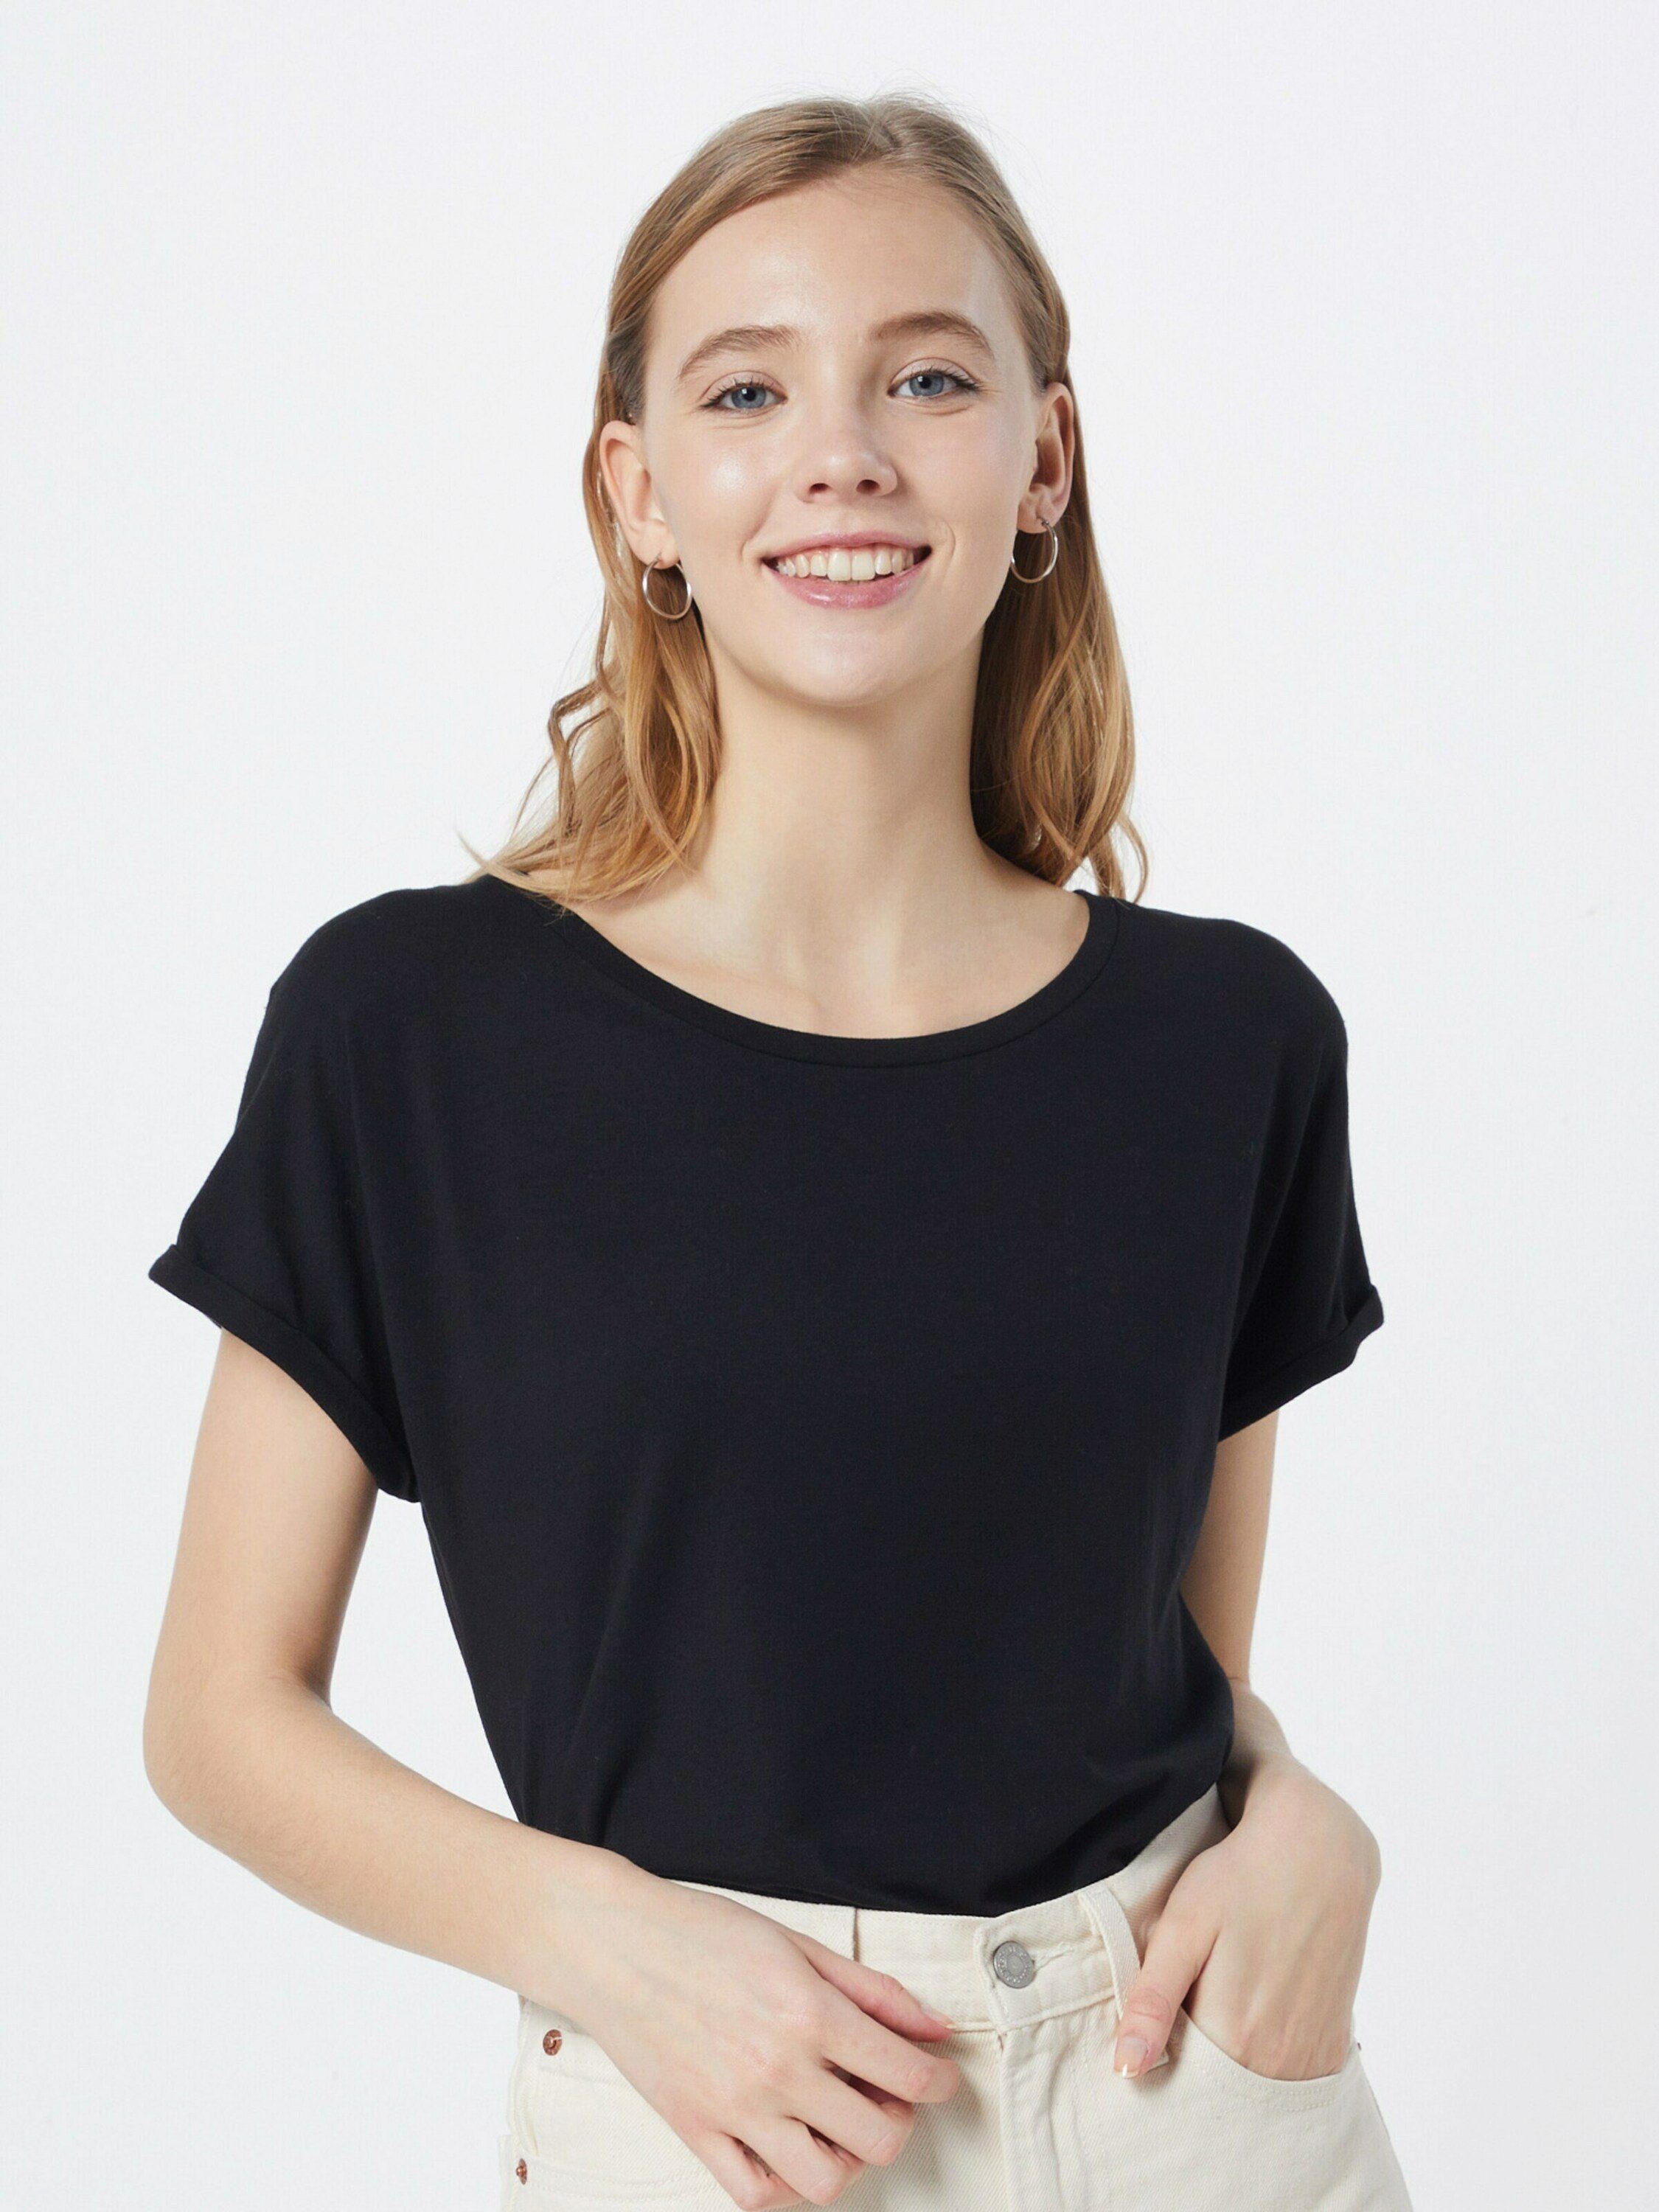 Details, Black (1-tlg) (80001) Weiteres Pamila Detail b.young T-Shirt Plain/ohne